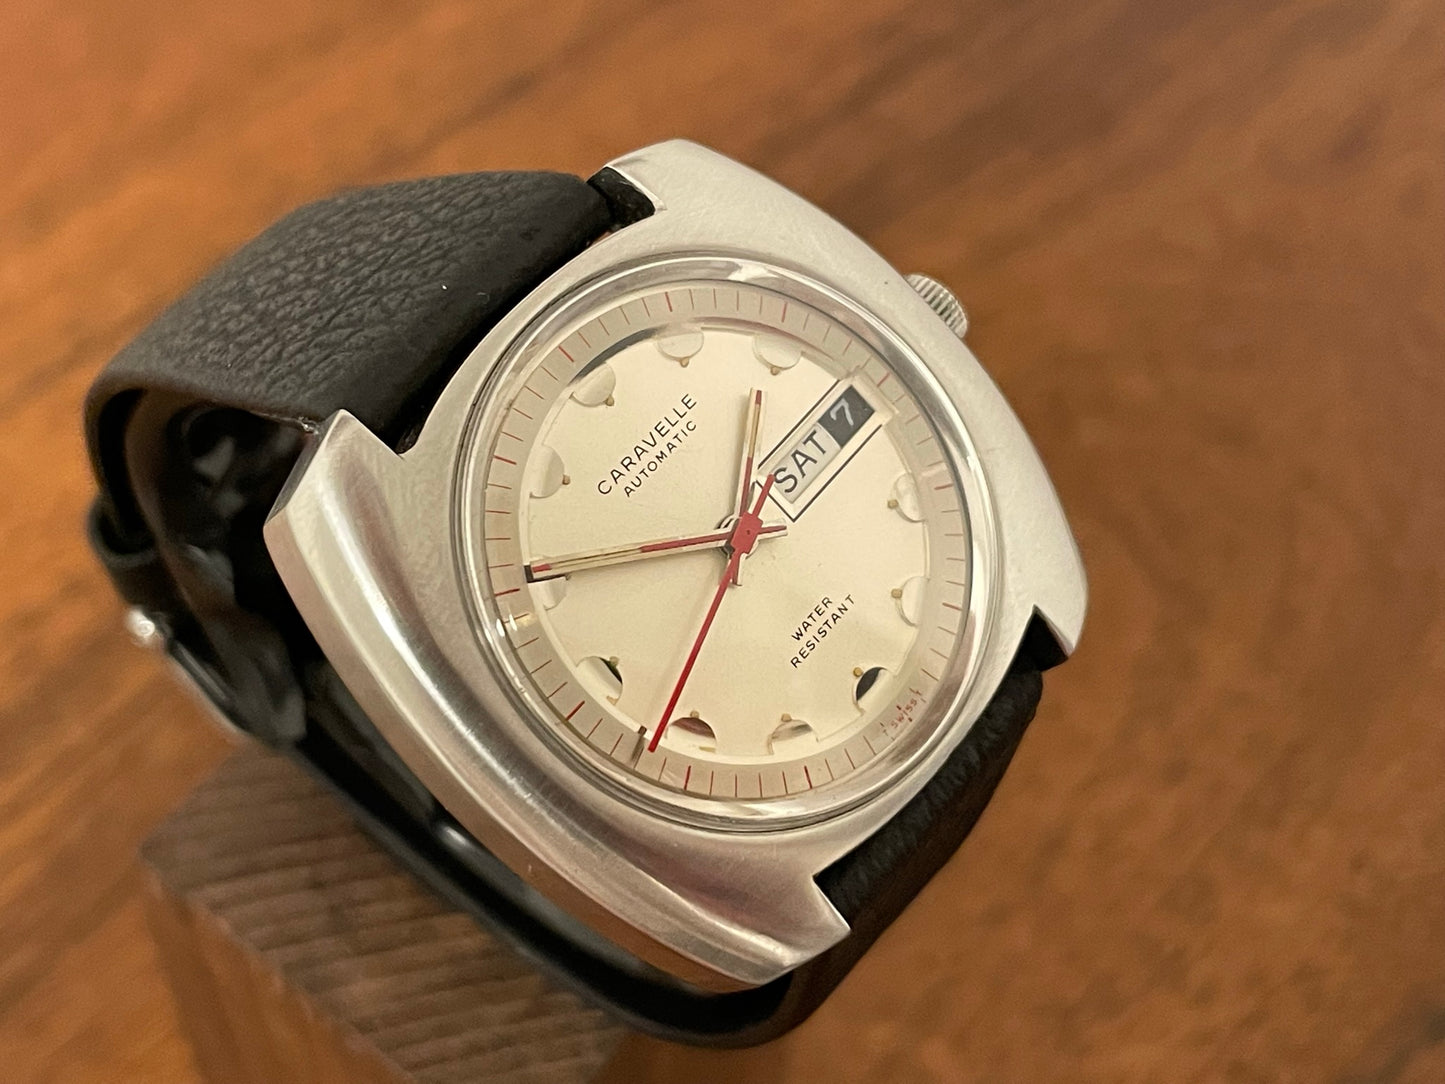 (1971) Caravelle automatic ref 7098 "UFO" case N1 (Full service)